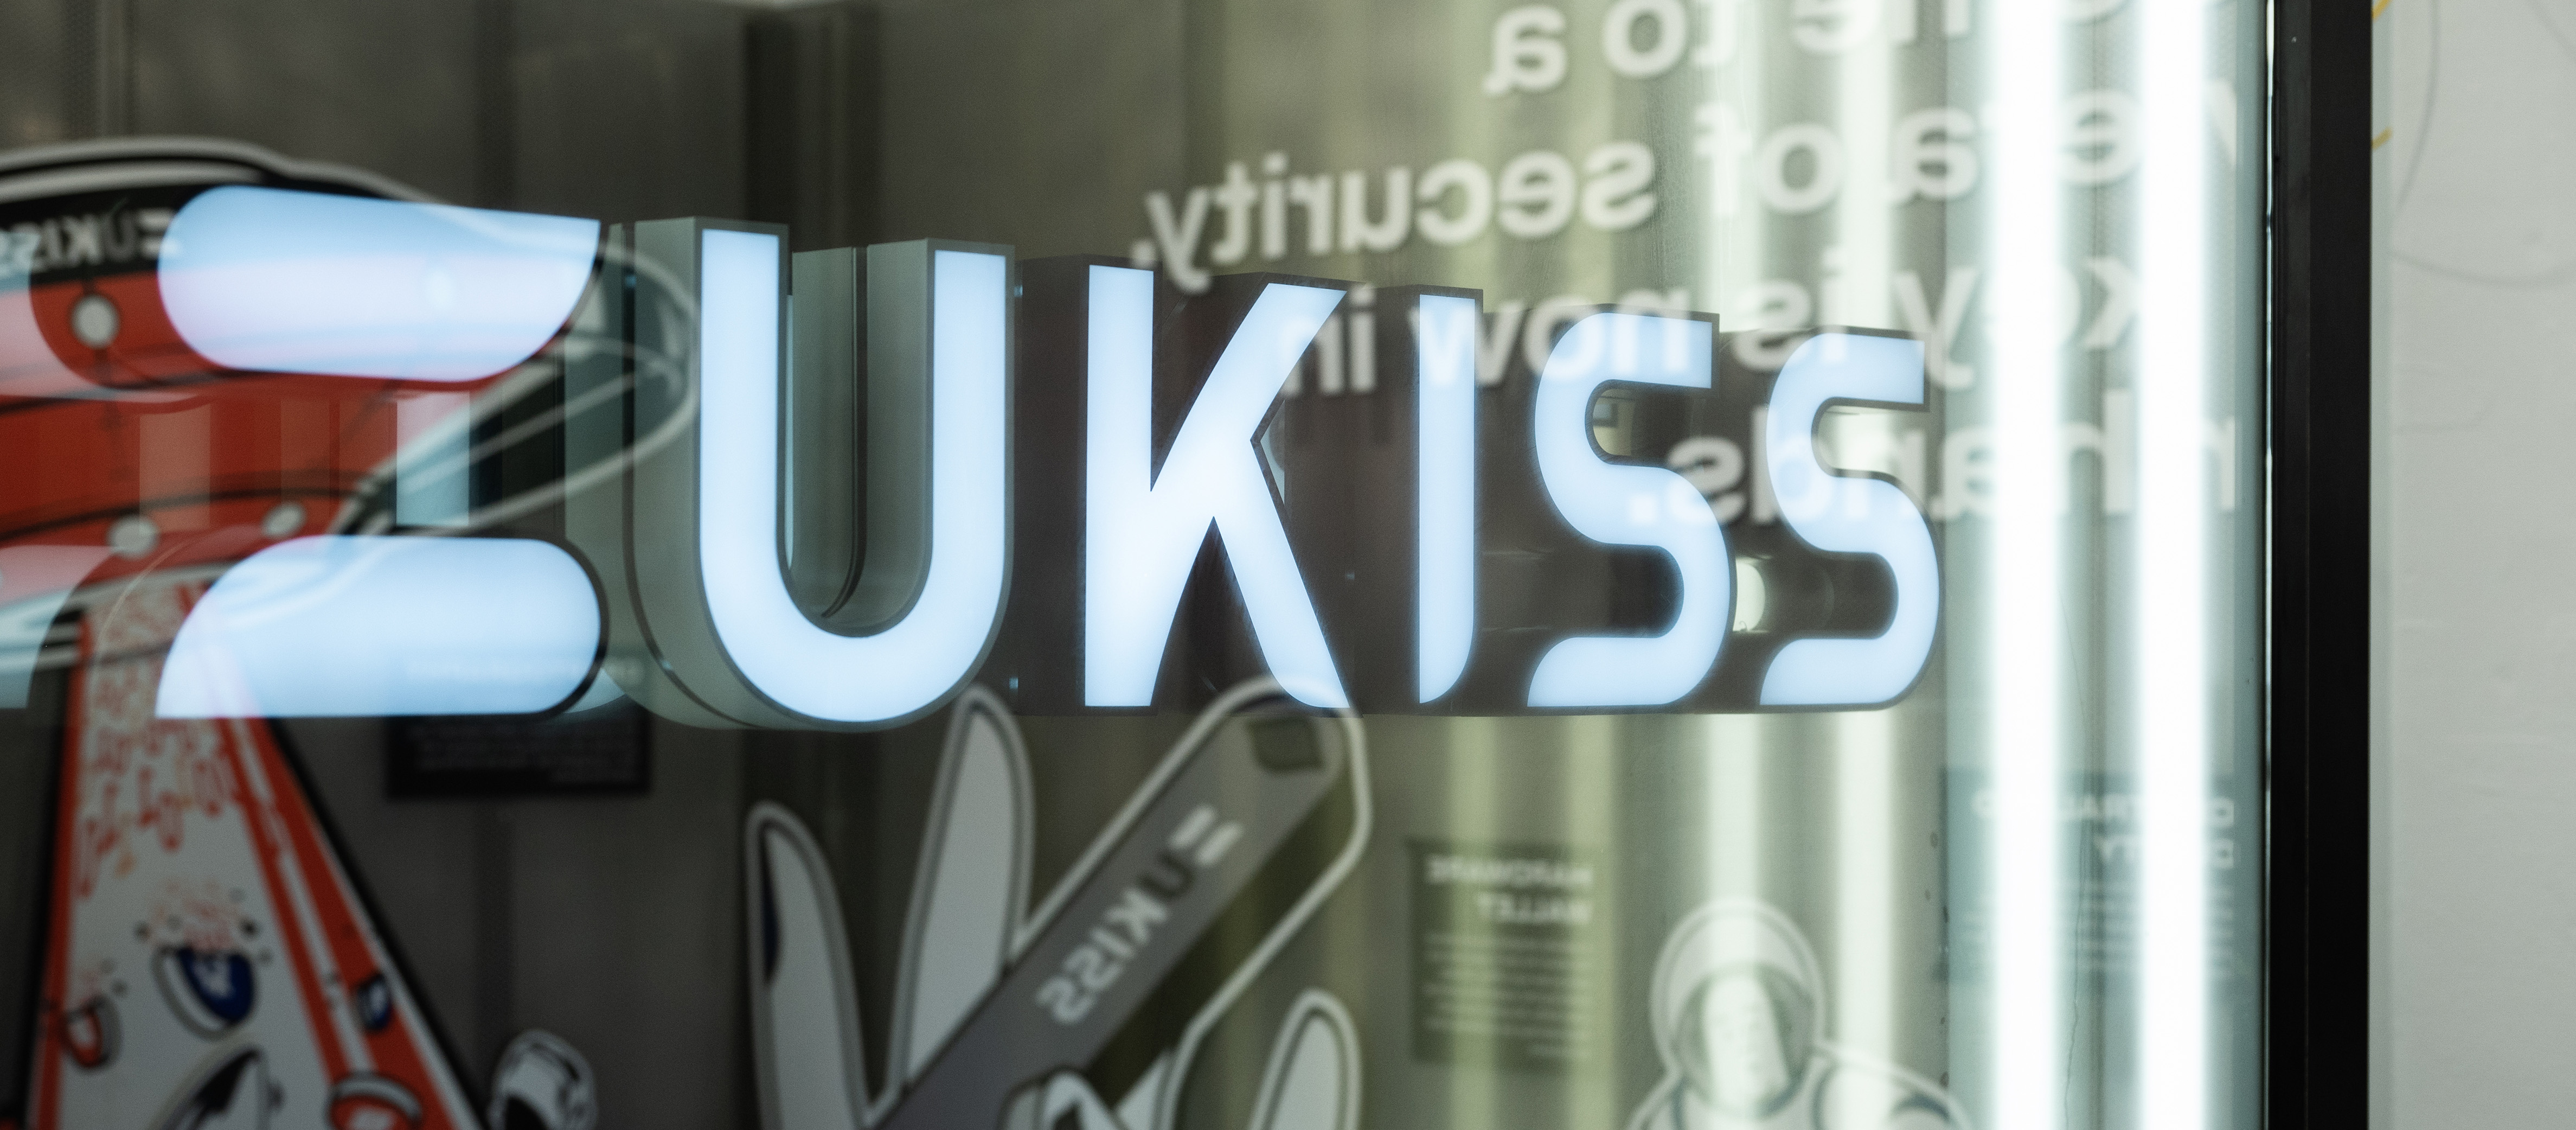 UKISS Technology lands in Singapore’s ‘Silicon Valley’